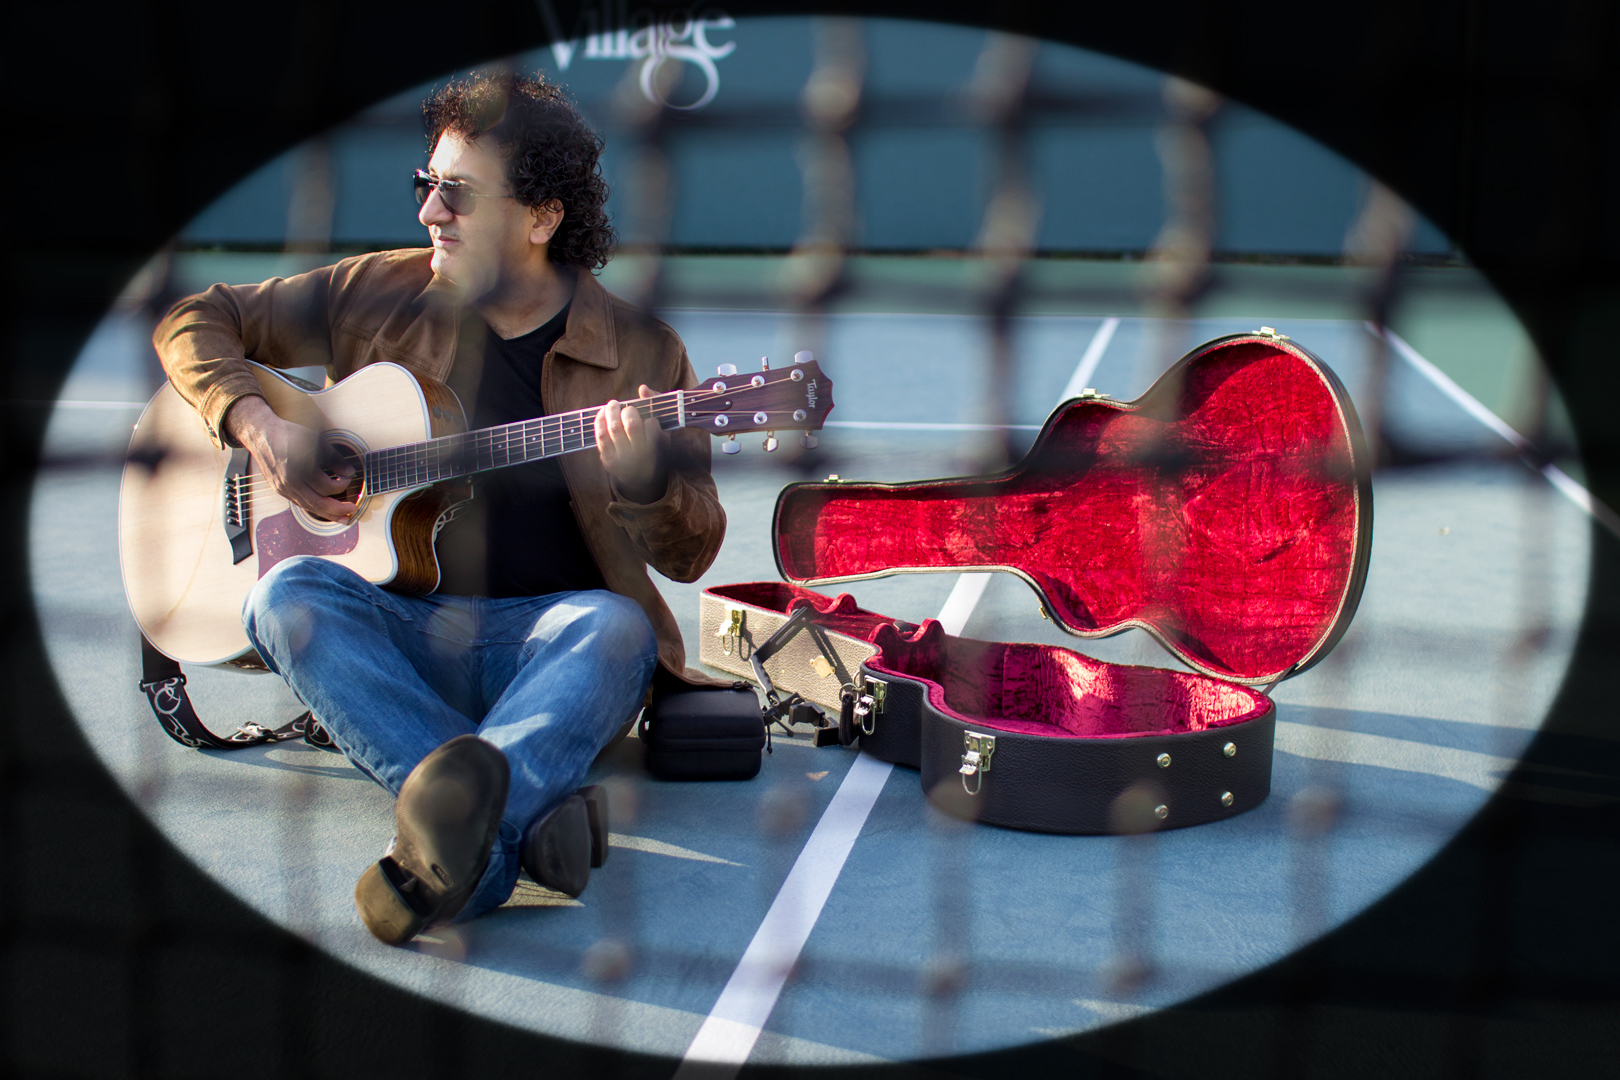 a man sitting on a tennis court playing guitar alongside is a guitar case